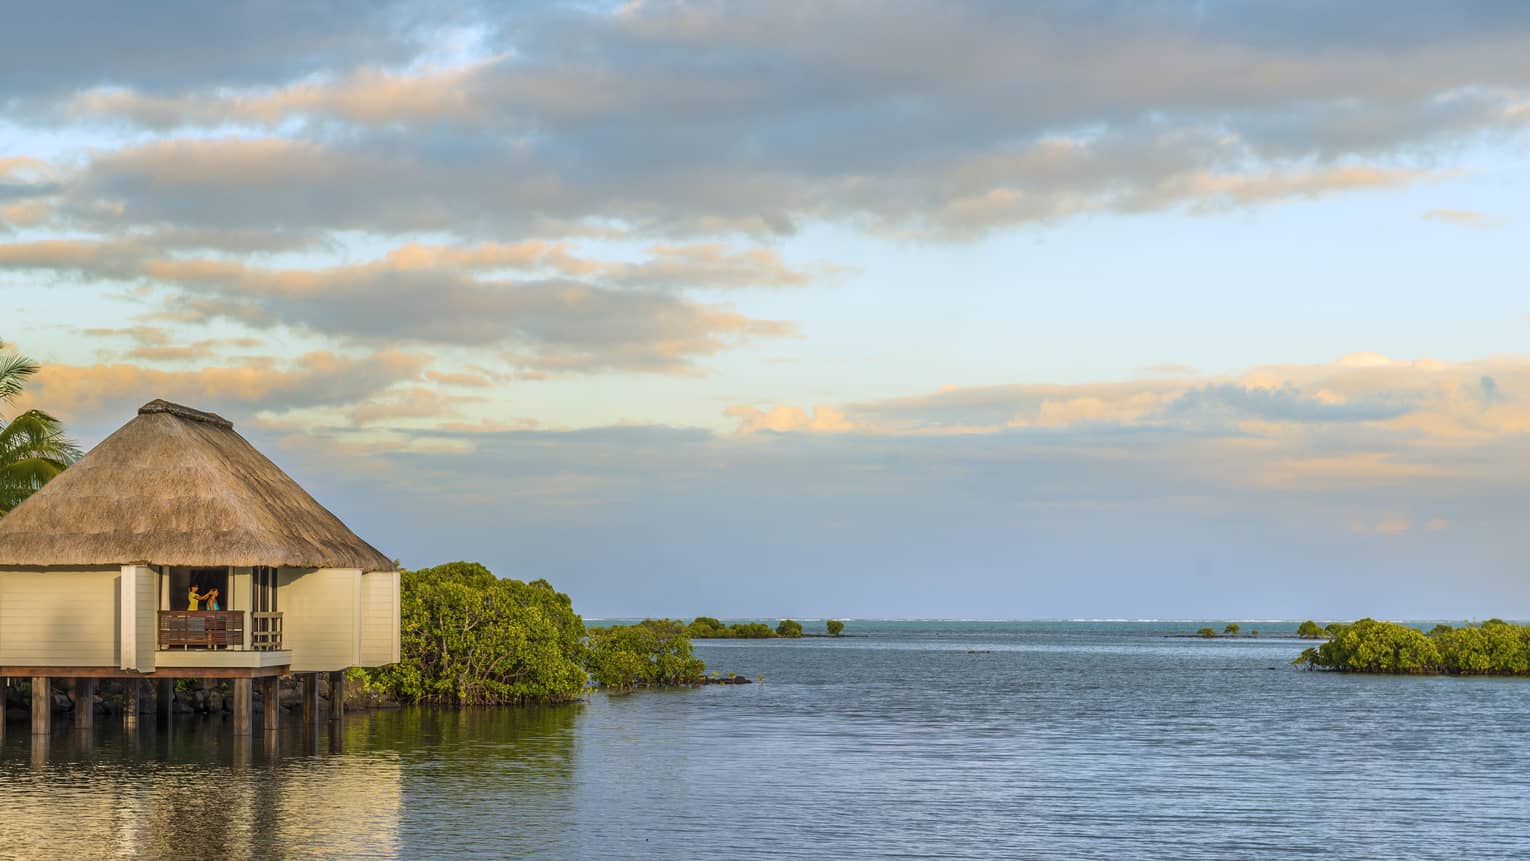 Overwater spa villa with thatched roof at sunrise